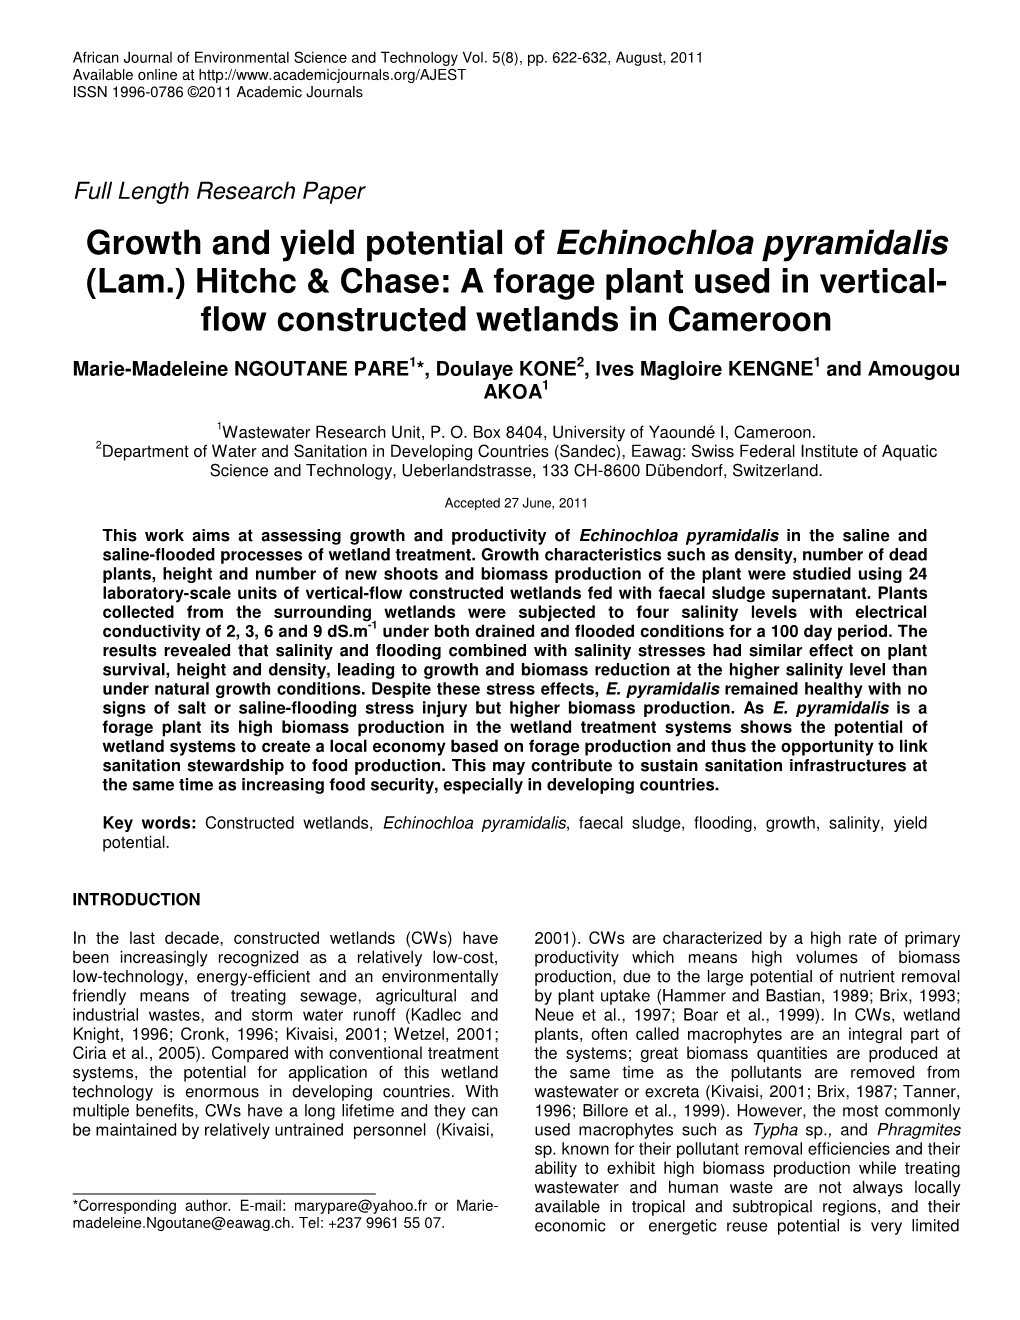 Growth and Yield Potential of Echinochloa Pyramidalis (Lam.) Hitchc & Chase: a Forage Plant Used in Vertical- Flow Constructed Wetlands in Cameroon